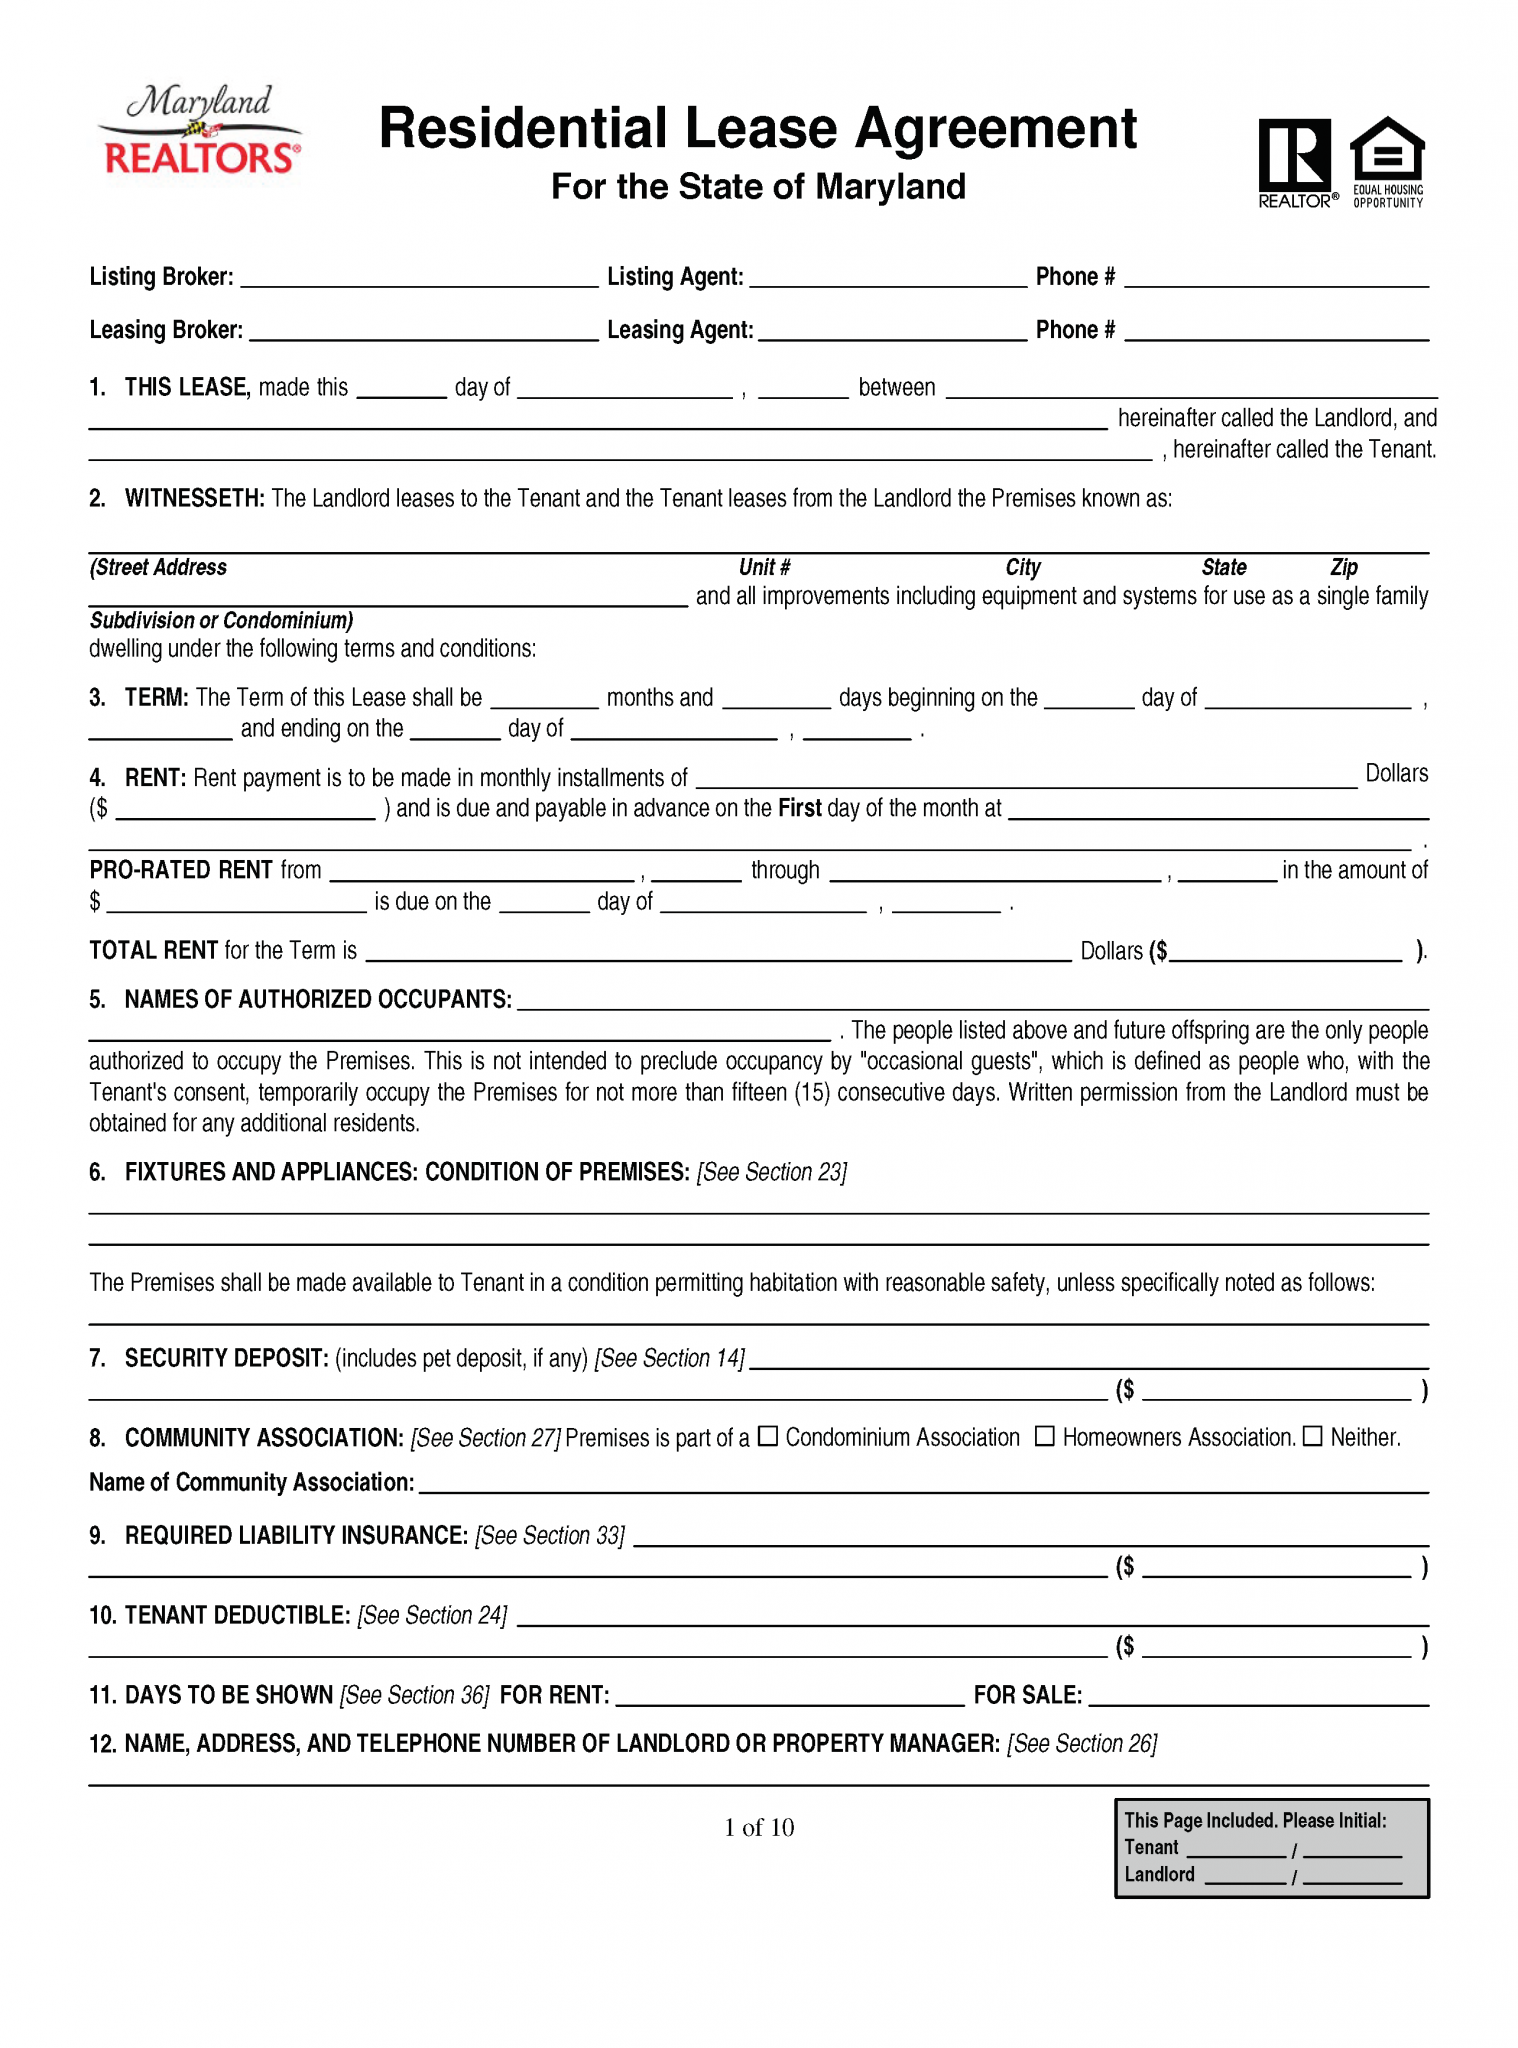 free-maryland-residential-lease-agreement-pdf